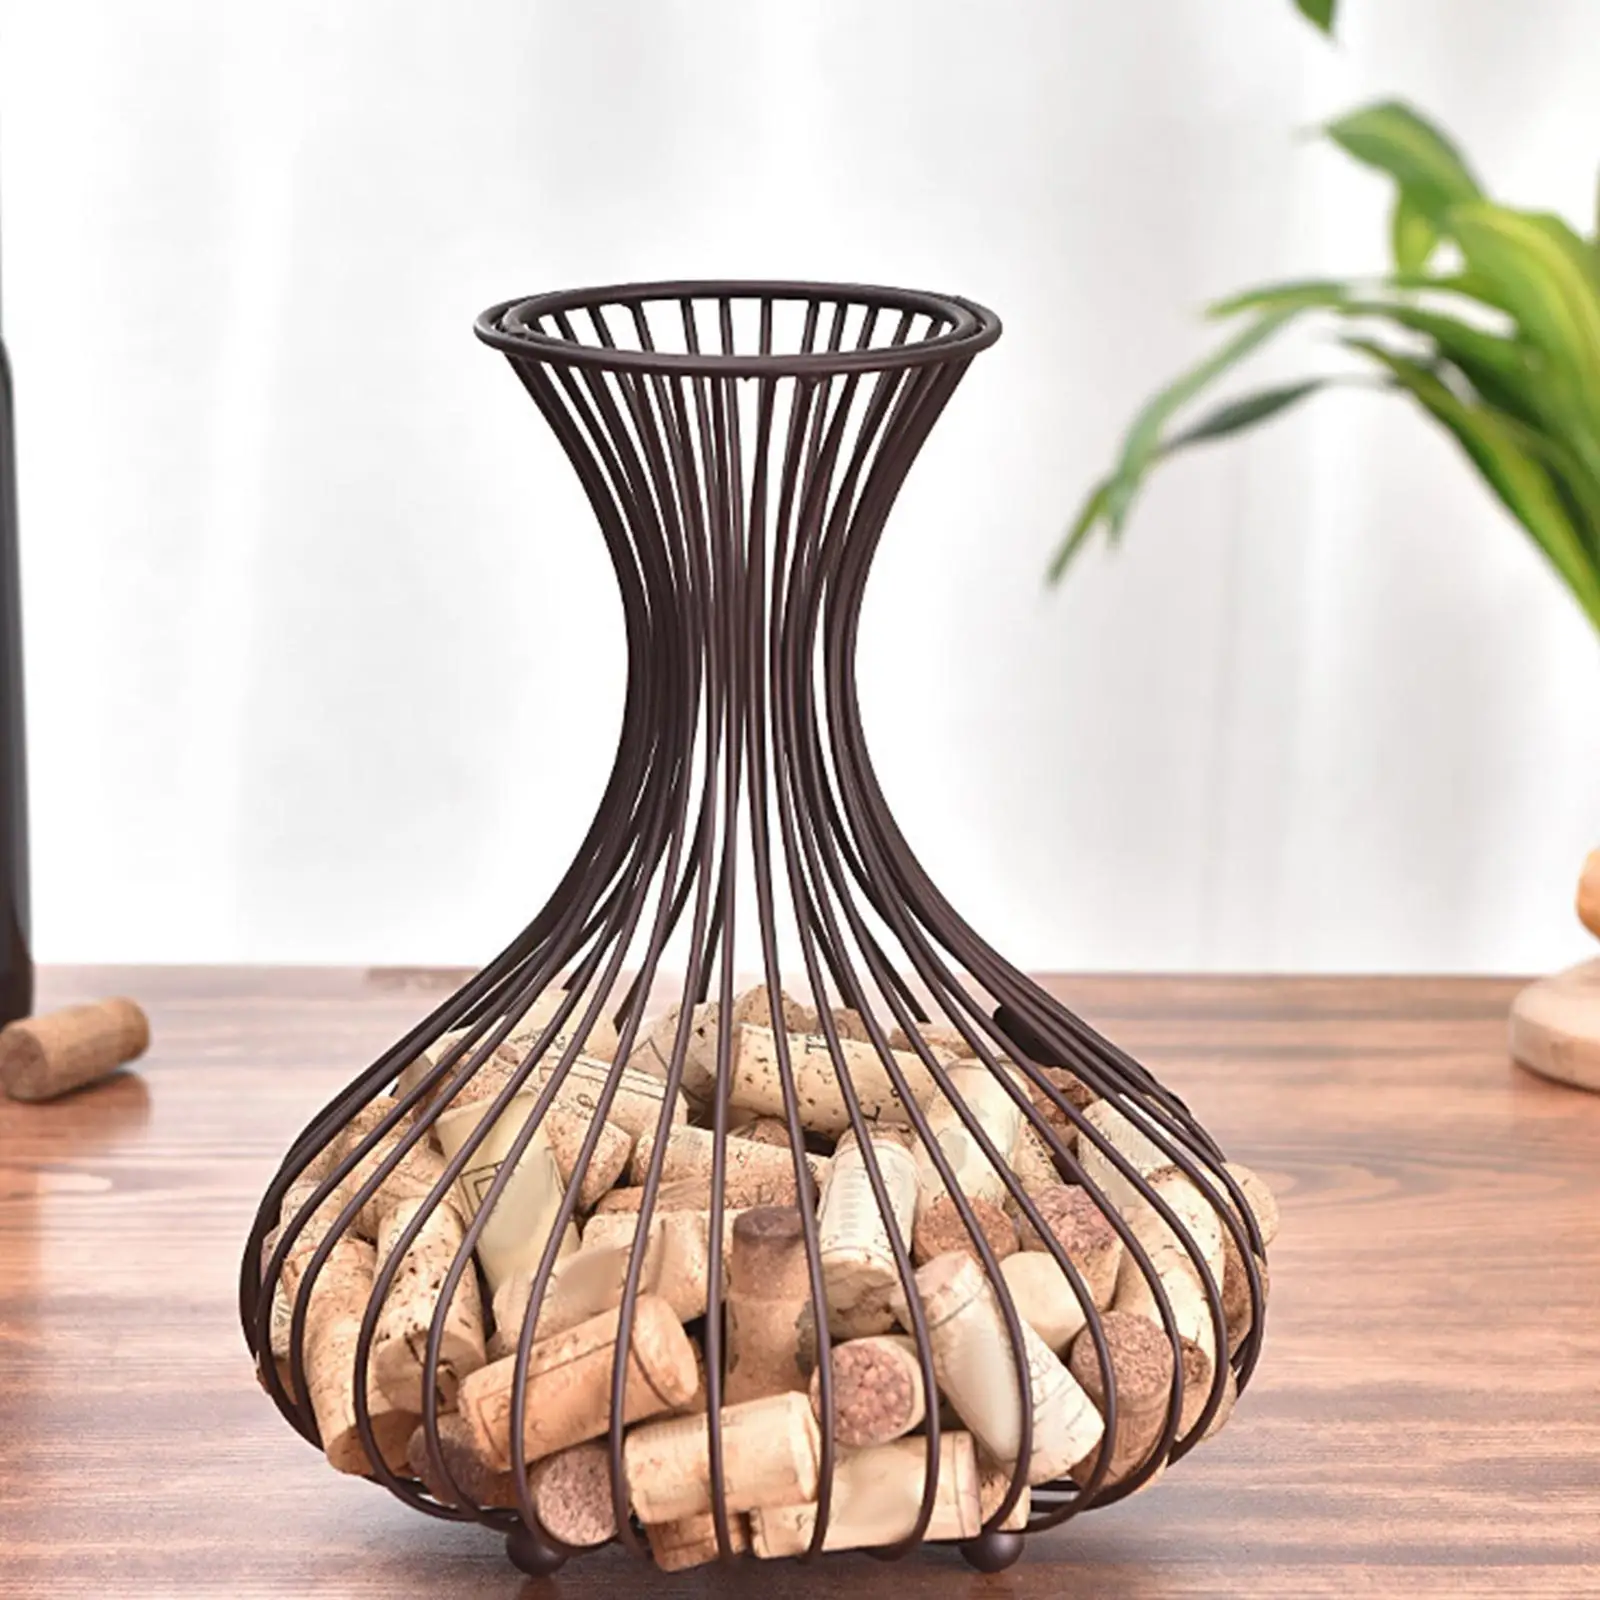 Cork Container Decorative  Basket Cork Organizer Display Stopper Table Cork Container Flower Vase for Restaurant Table Gifts